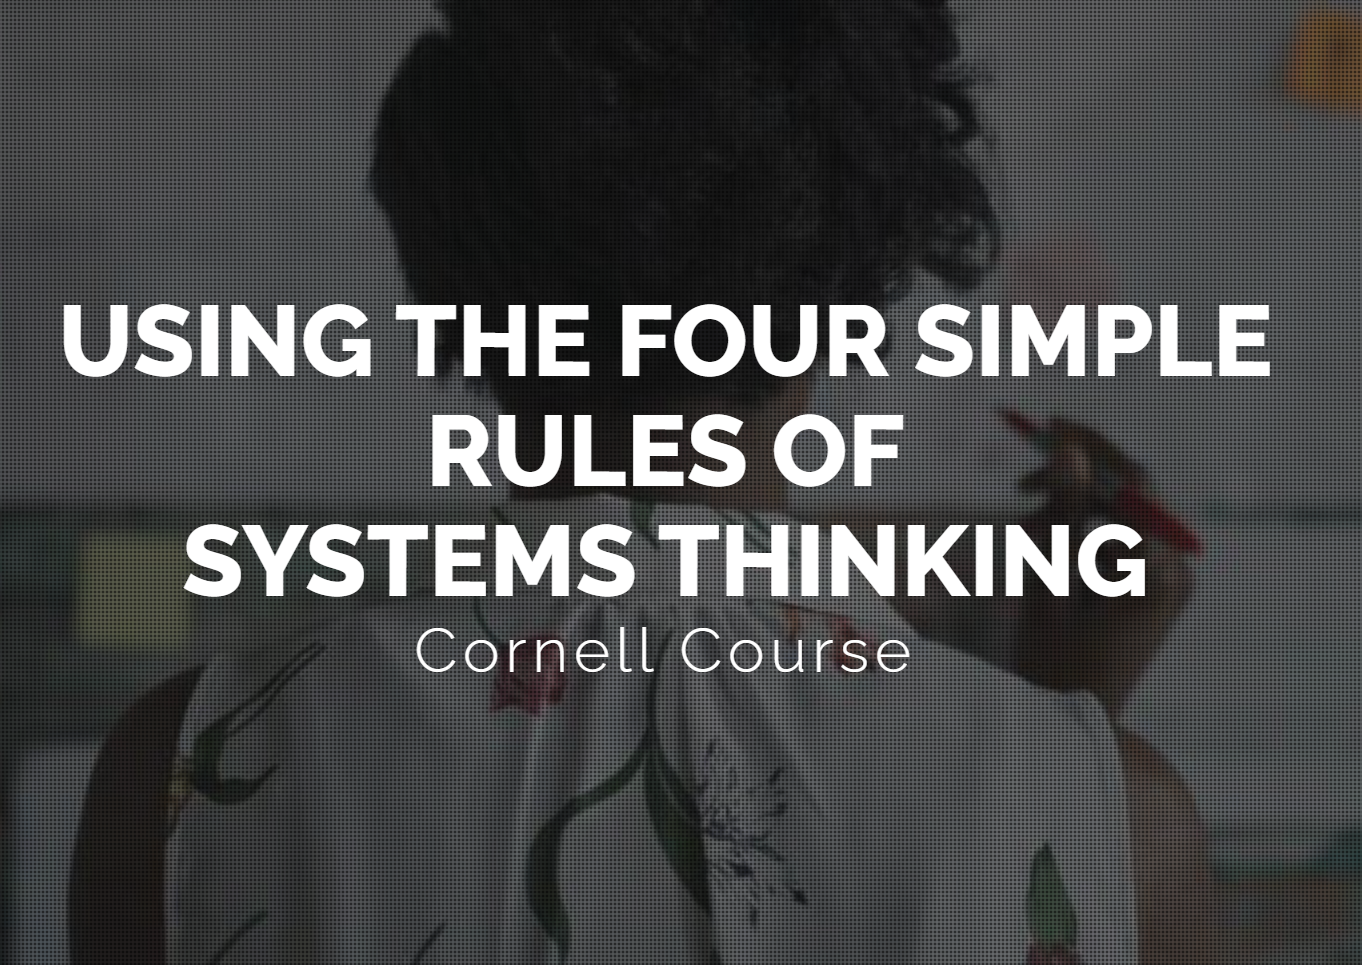 Using the Four Simple Rules of Systems Thinking